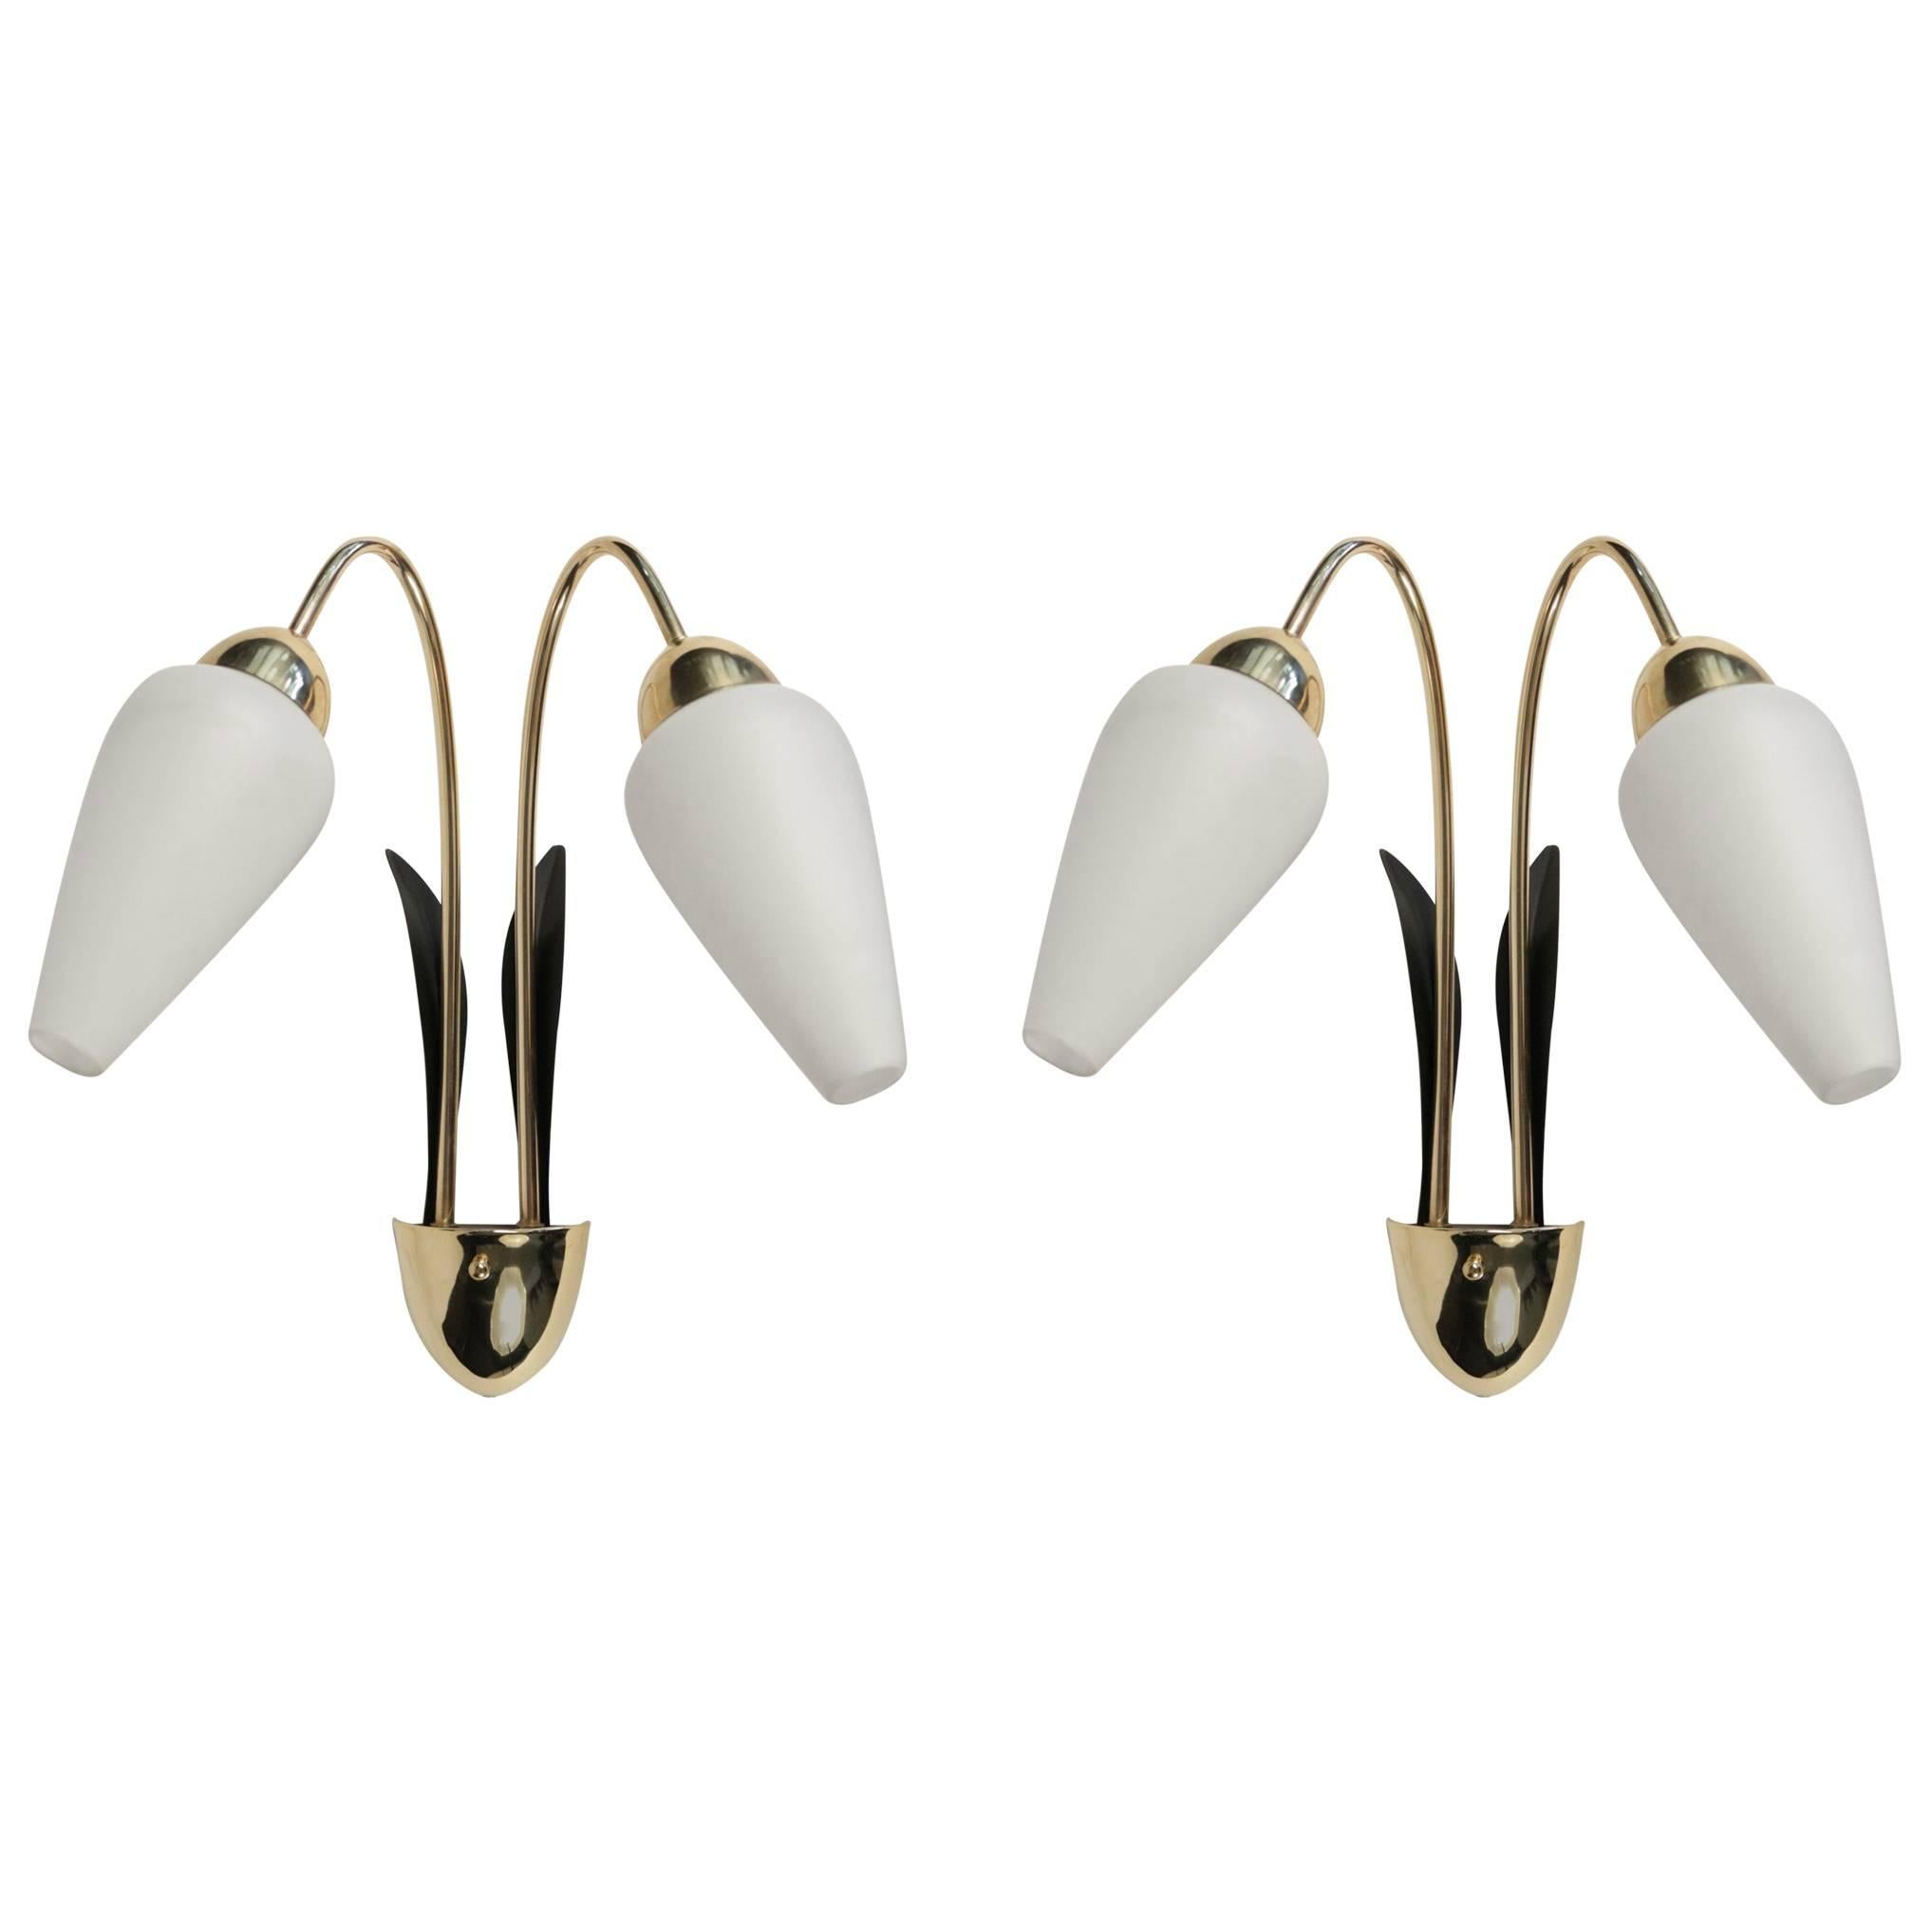 Pair of Sconces, Flower Buds by Maison Lunel, 1950